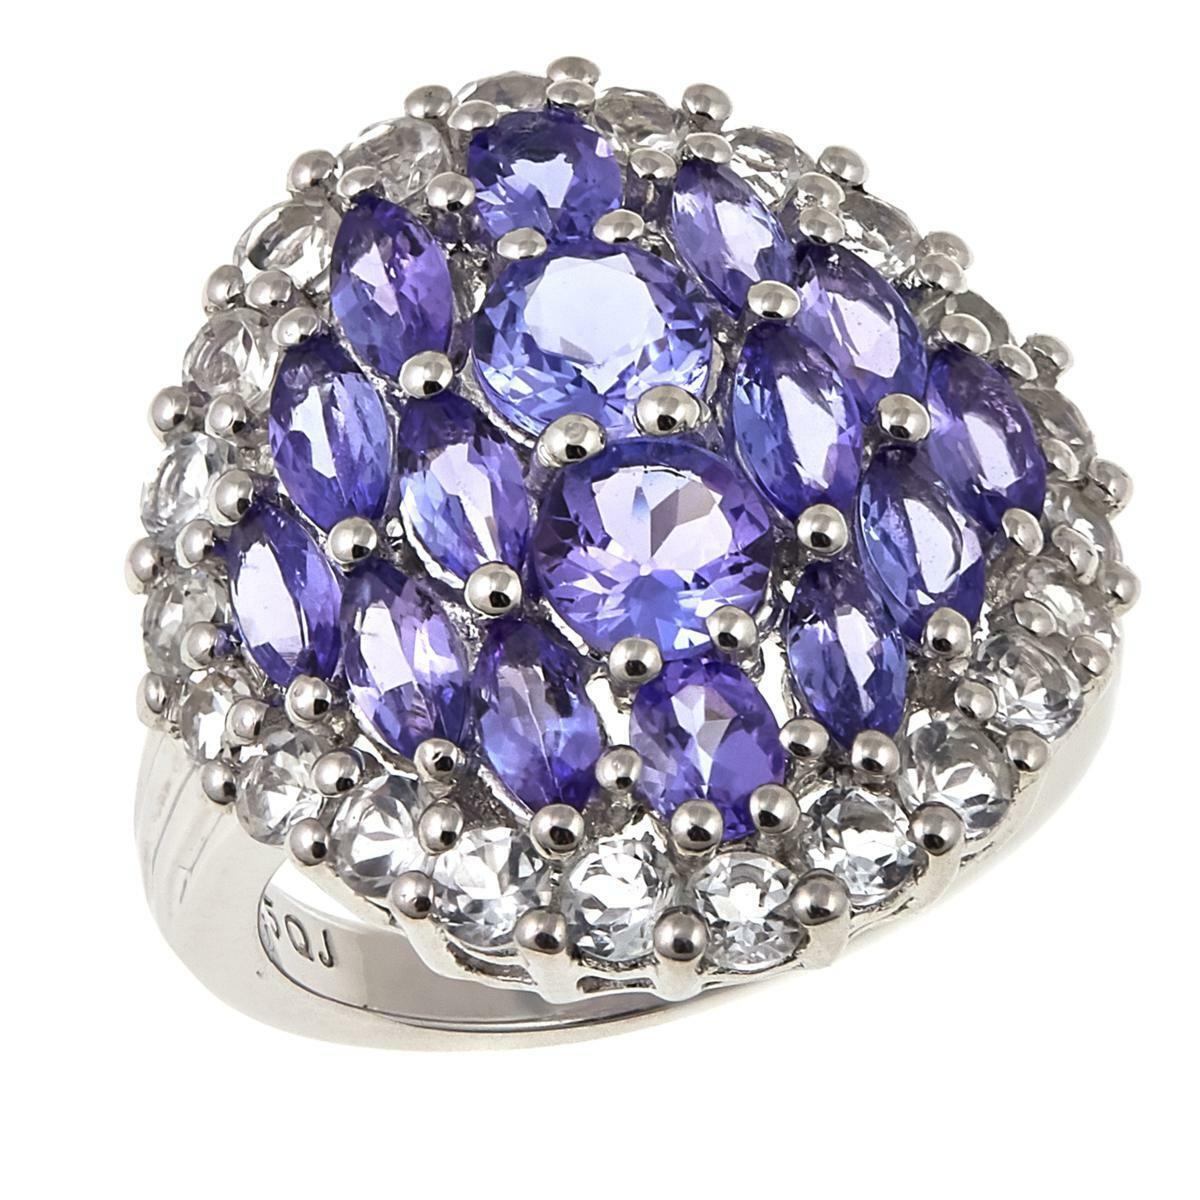 Colleen Lopez 4.47ctw Tanzanite & White Topaz Sterling Silver Ring, Size 6